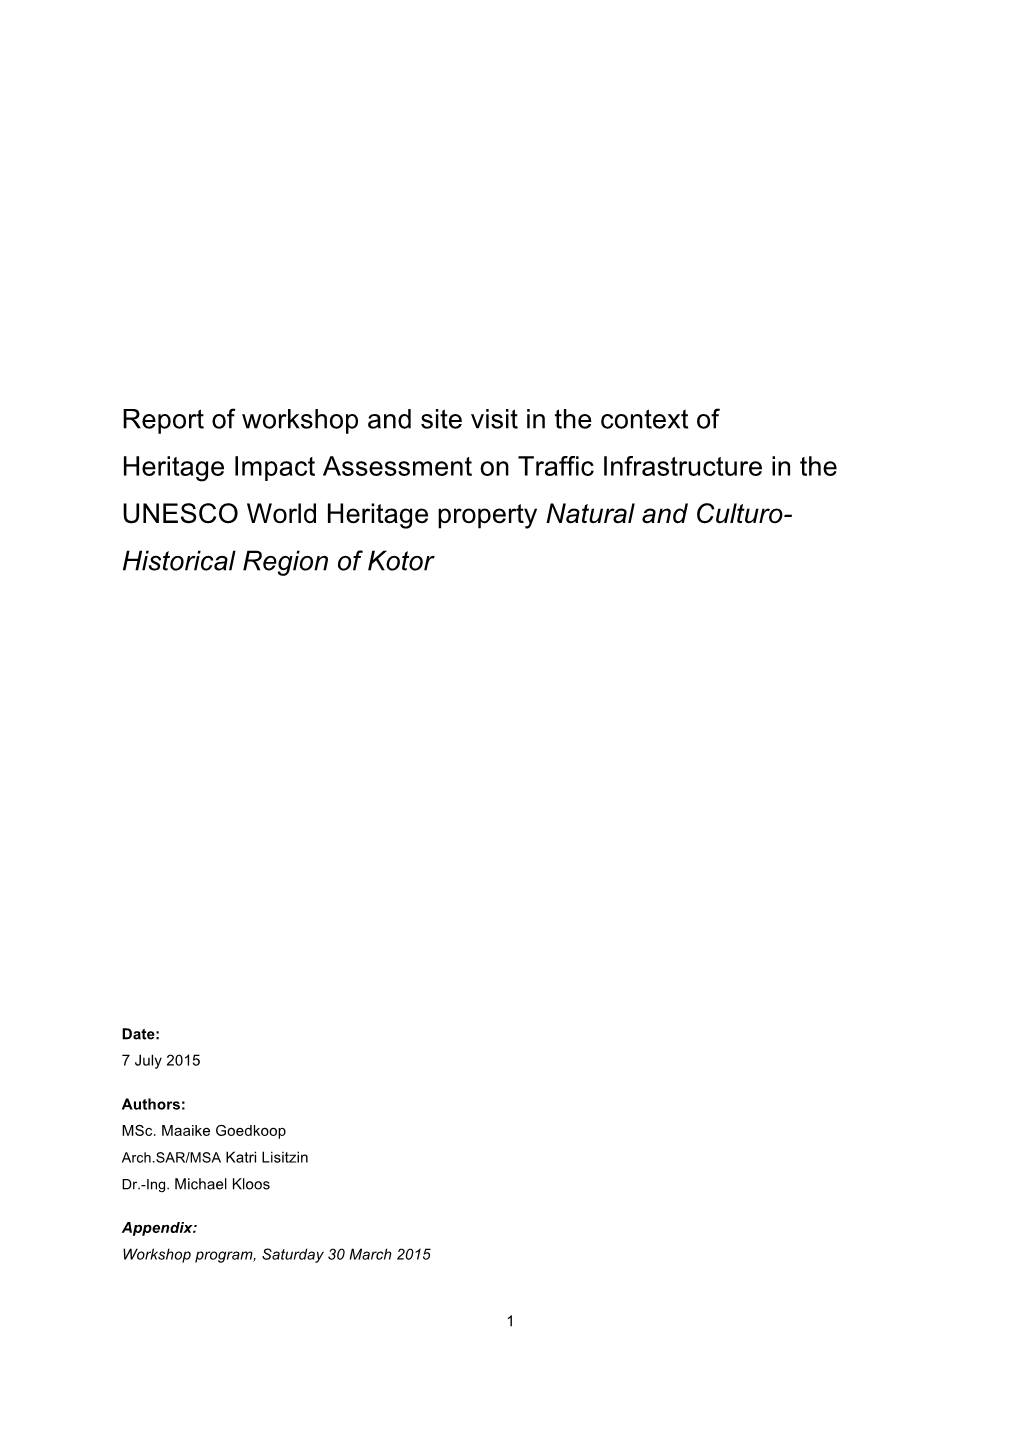 Report of Workshop and Site Visit in the Context of Heritage Impact